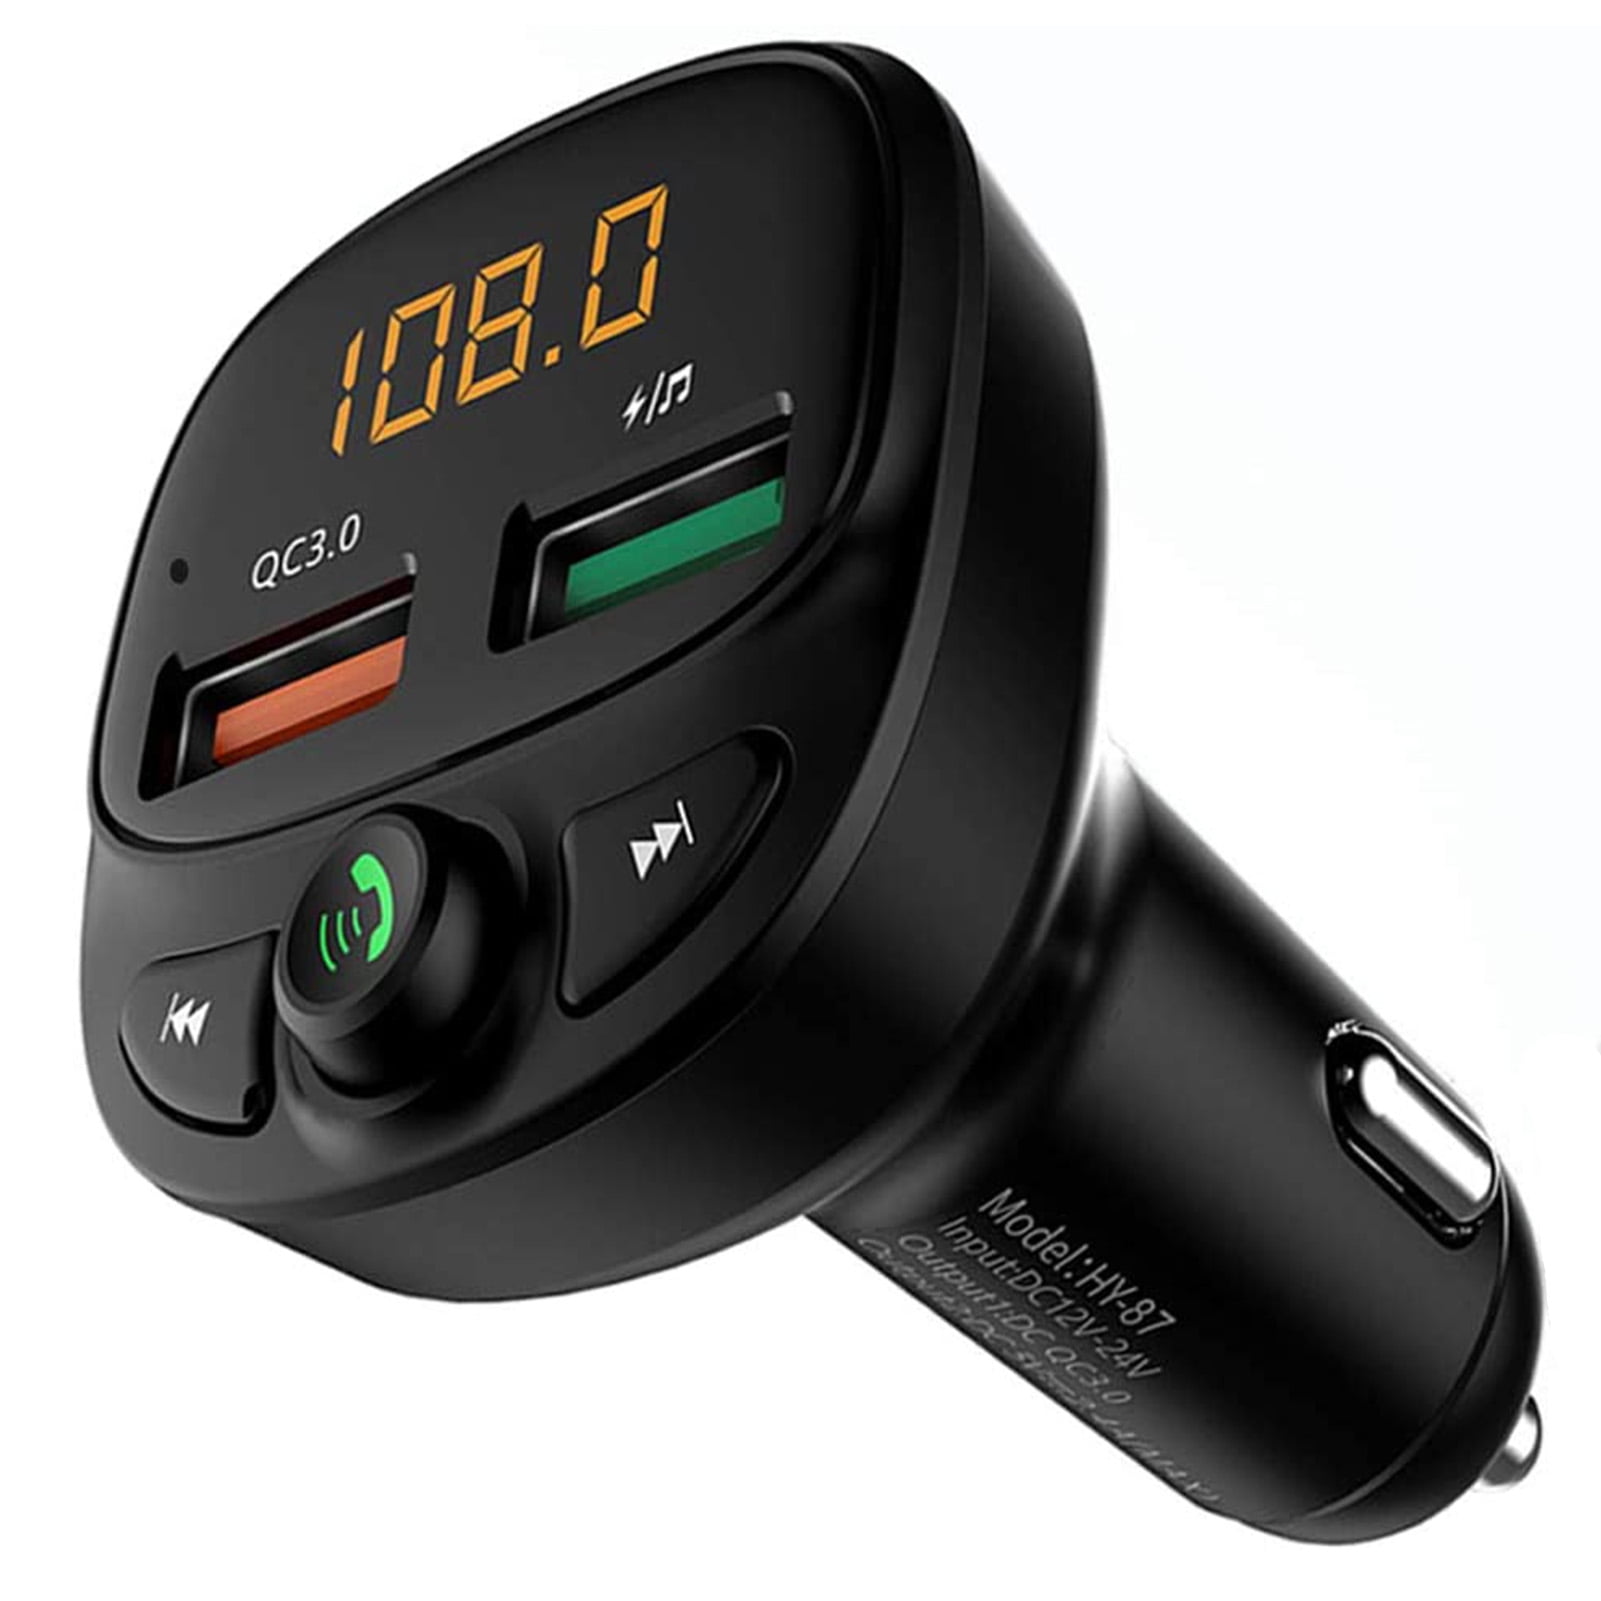 2021 Car FM Transmitter Wireless in-Car Radio Adapter Car Kit Bluetooth MP3 Player Car Charger Support Hands-Free Calling USB Drive Black 20W Car Fast Charger 